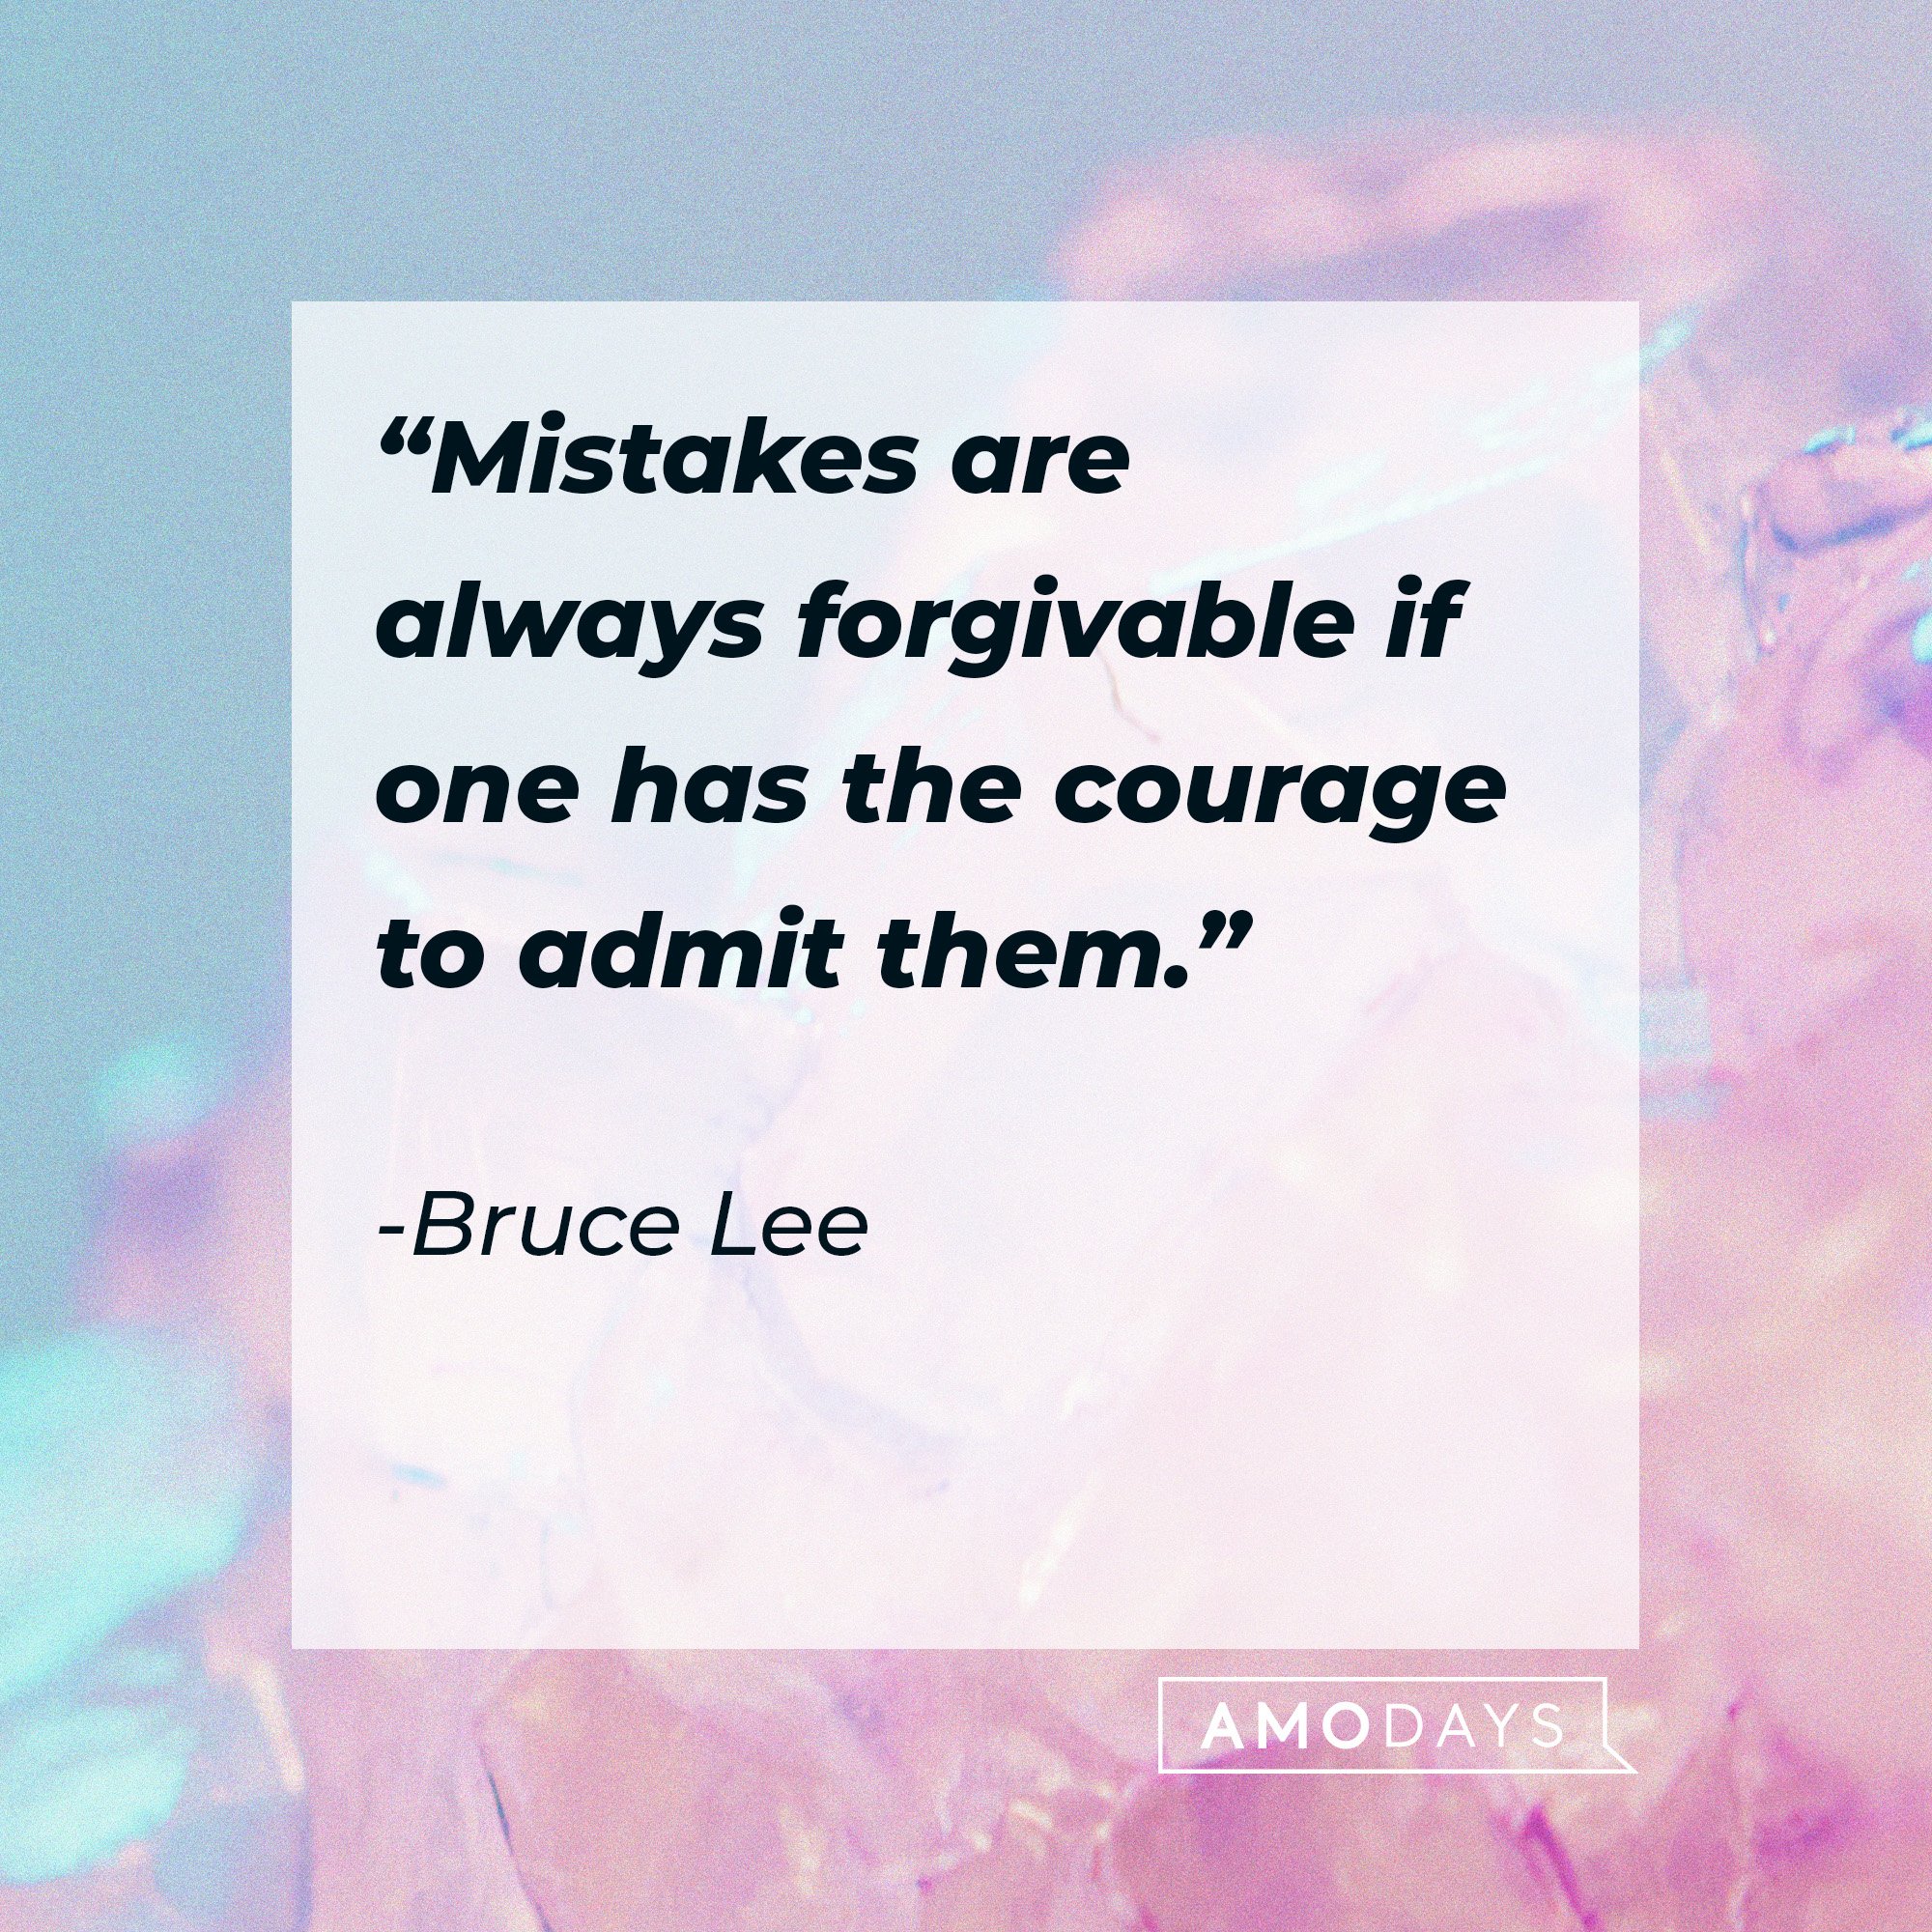 ruce Lee's quote: “Mistakes are always forgivable if one has the courage to admit them.” | Image: AmoDays